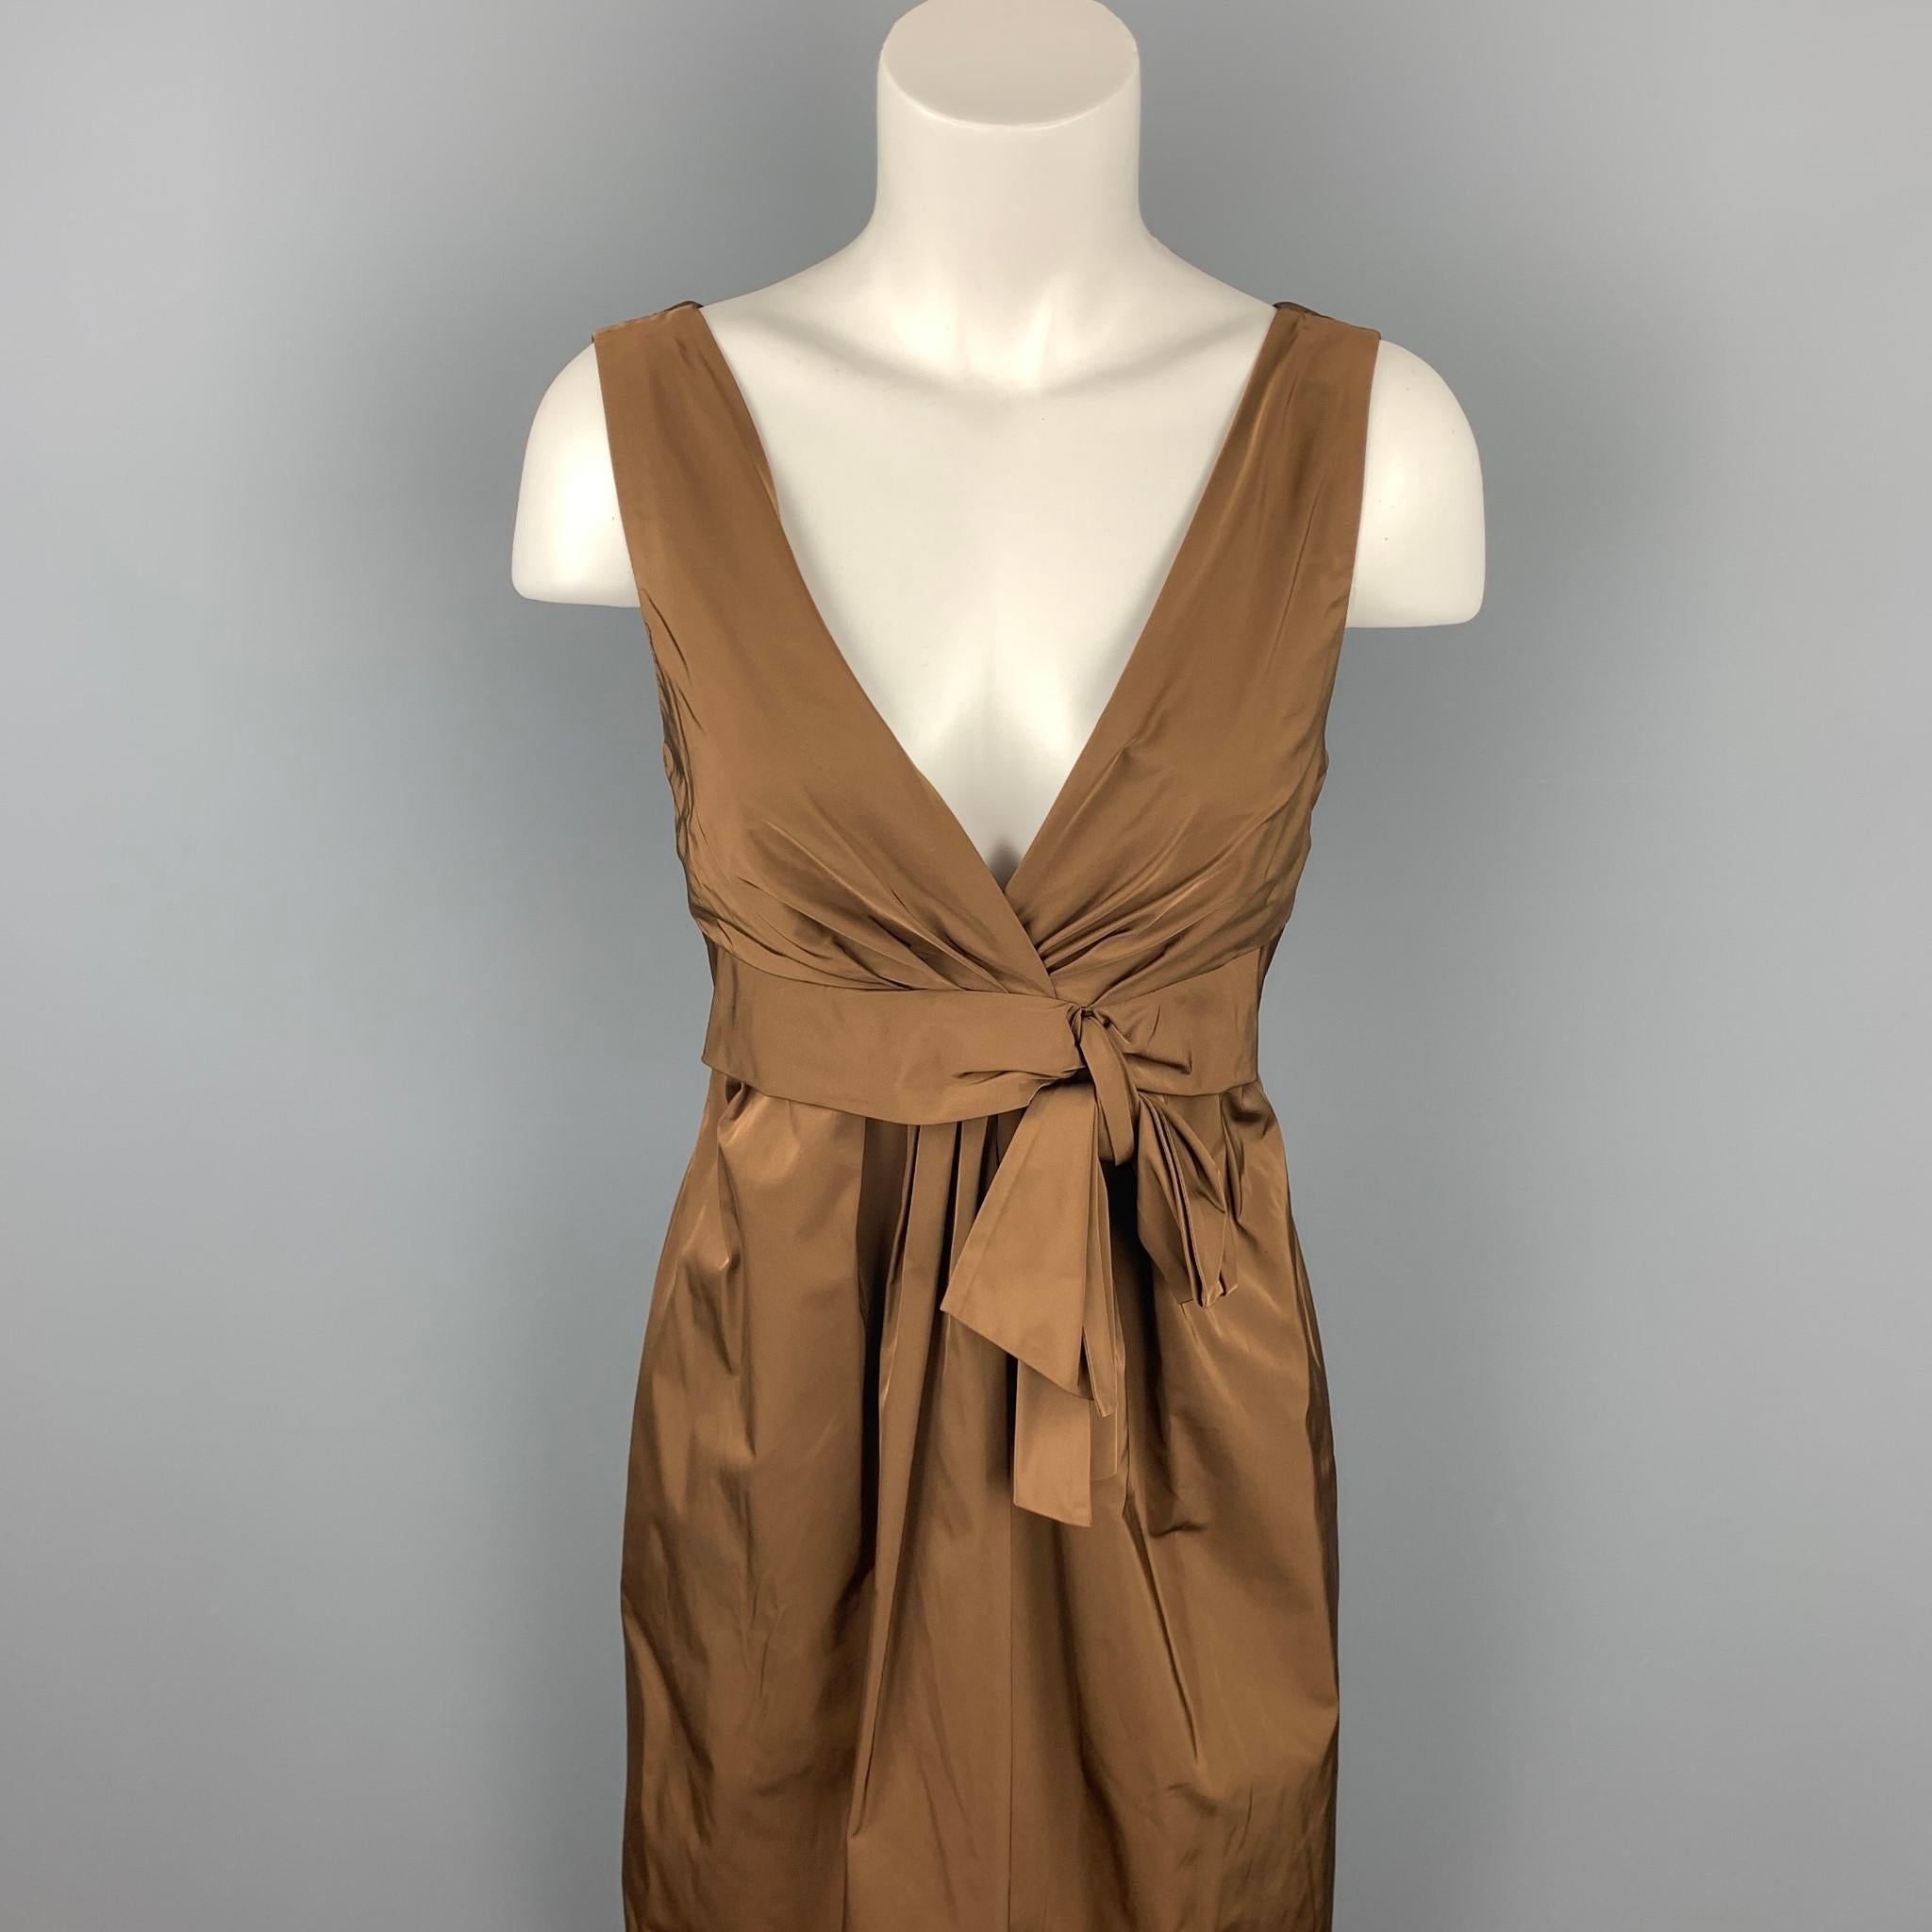 LIDA BADAY dress comes in a brown polyester with a slip liner featuring a sheath style, front bow, and a back zip up closure.

Good Pre-Owned Condition.
Marked: 8

Measurements:

Shoulder: 14.5 in. 
Bust: 32 in. 
Waist: 30 in. 
Hip: 38 in. 
Length: